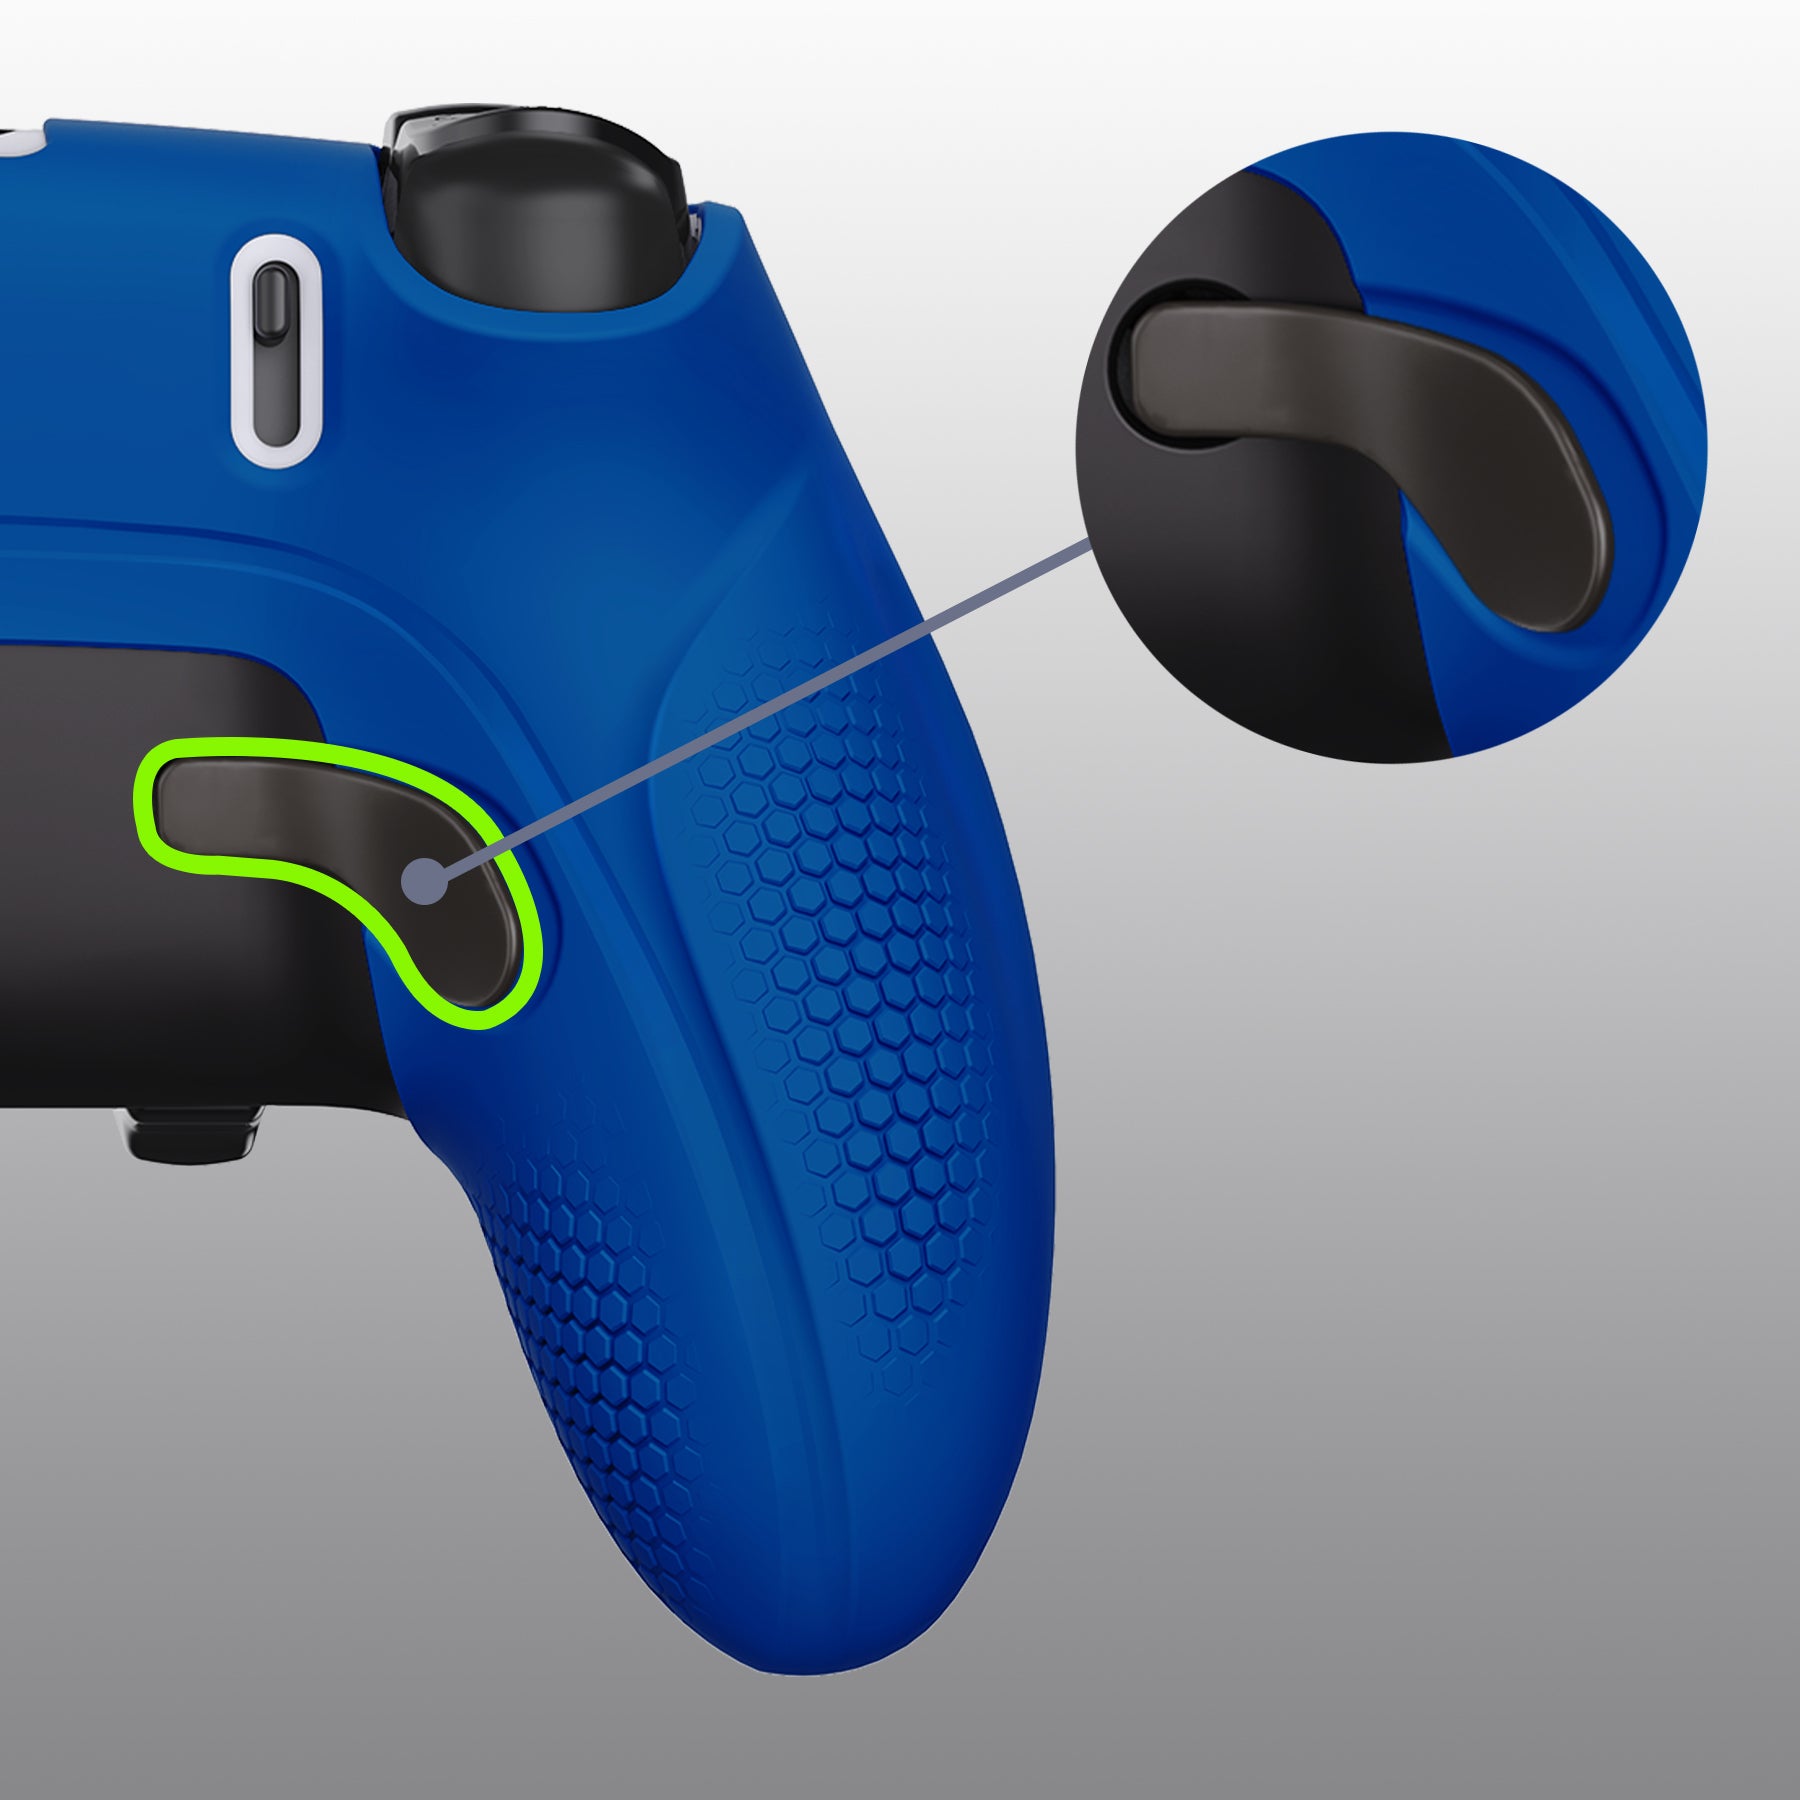 PlayVital Ninja Edition Anti-Slip Half-Covered Silicone Cover Skin with Thumb Grip Caps for PS5 Edge Controller - Blue - EYPFP008 PlayVital